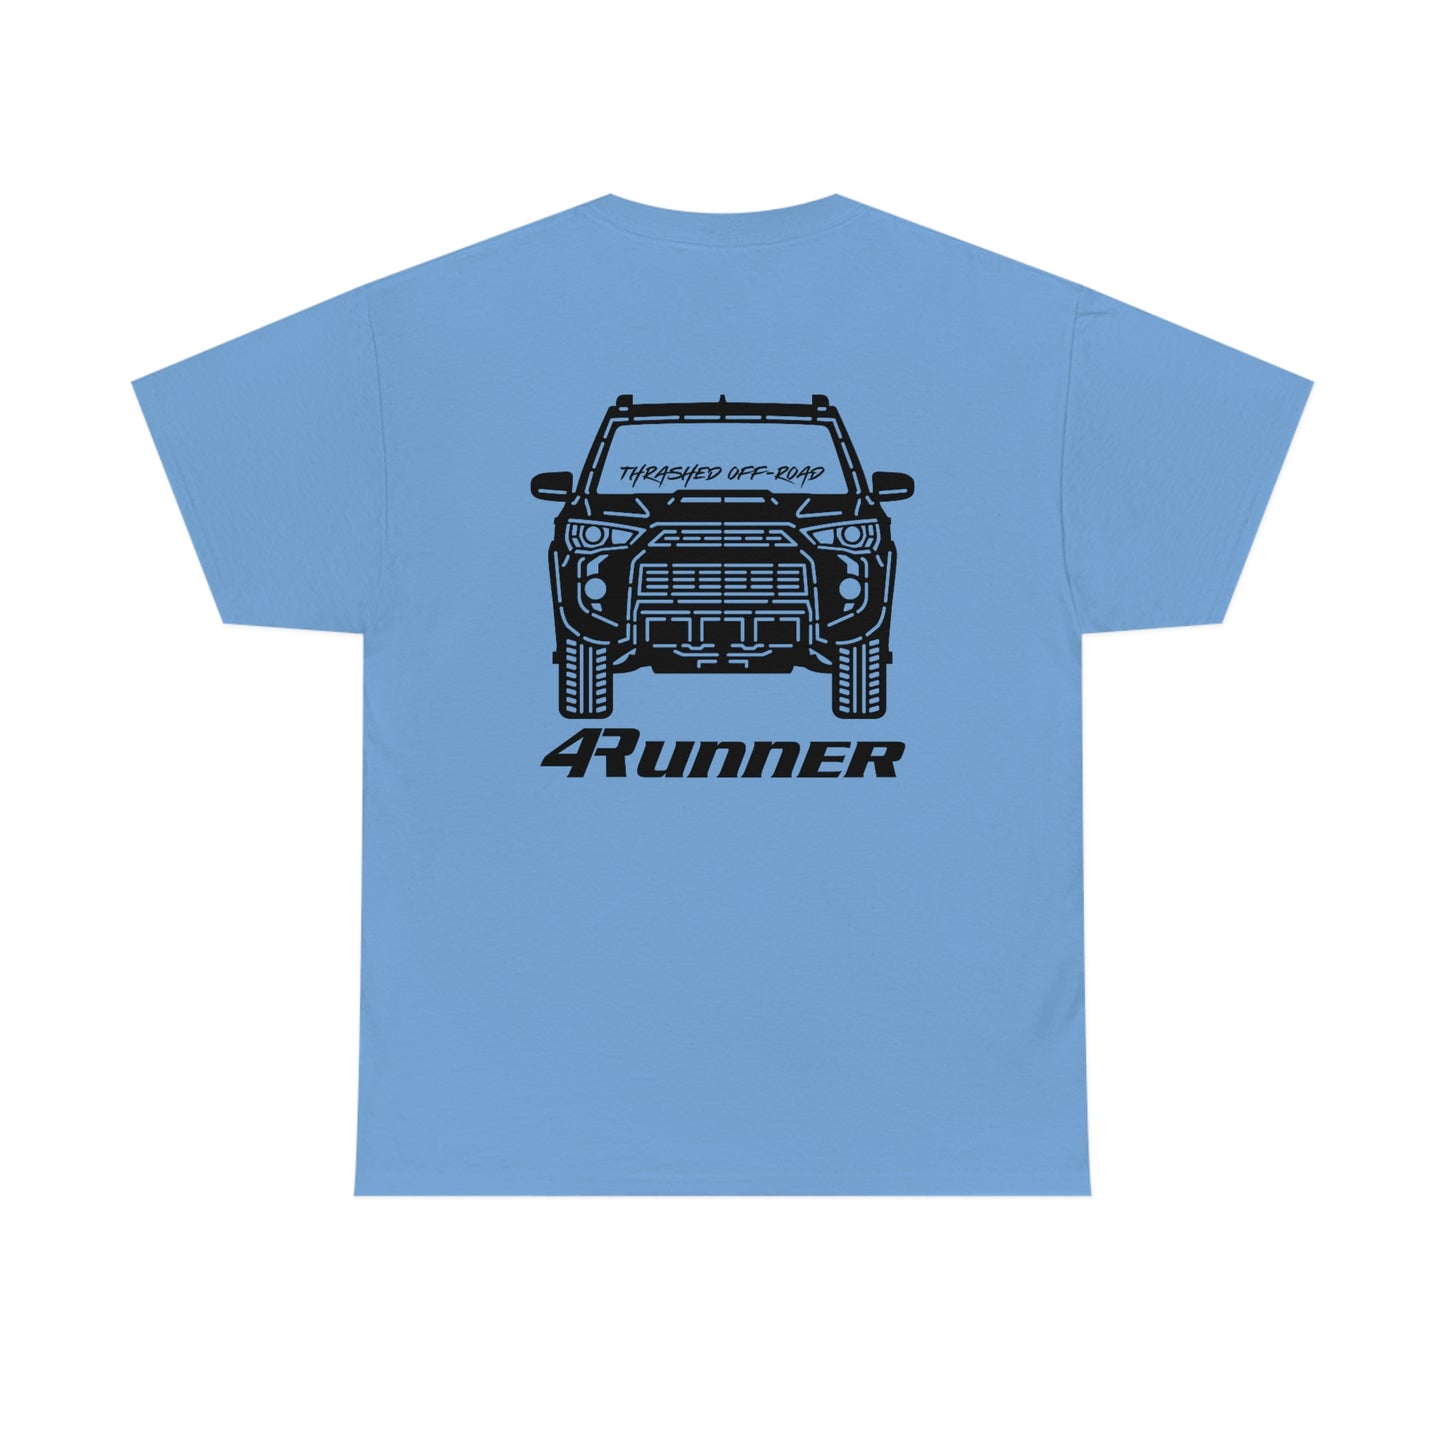 Thrashed Off-Road Abstract 4Runner Shirt - Mid-Atlantic Off-Roading